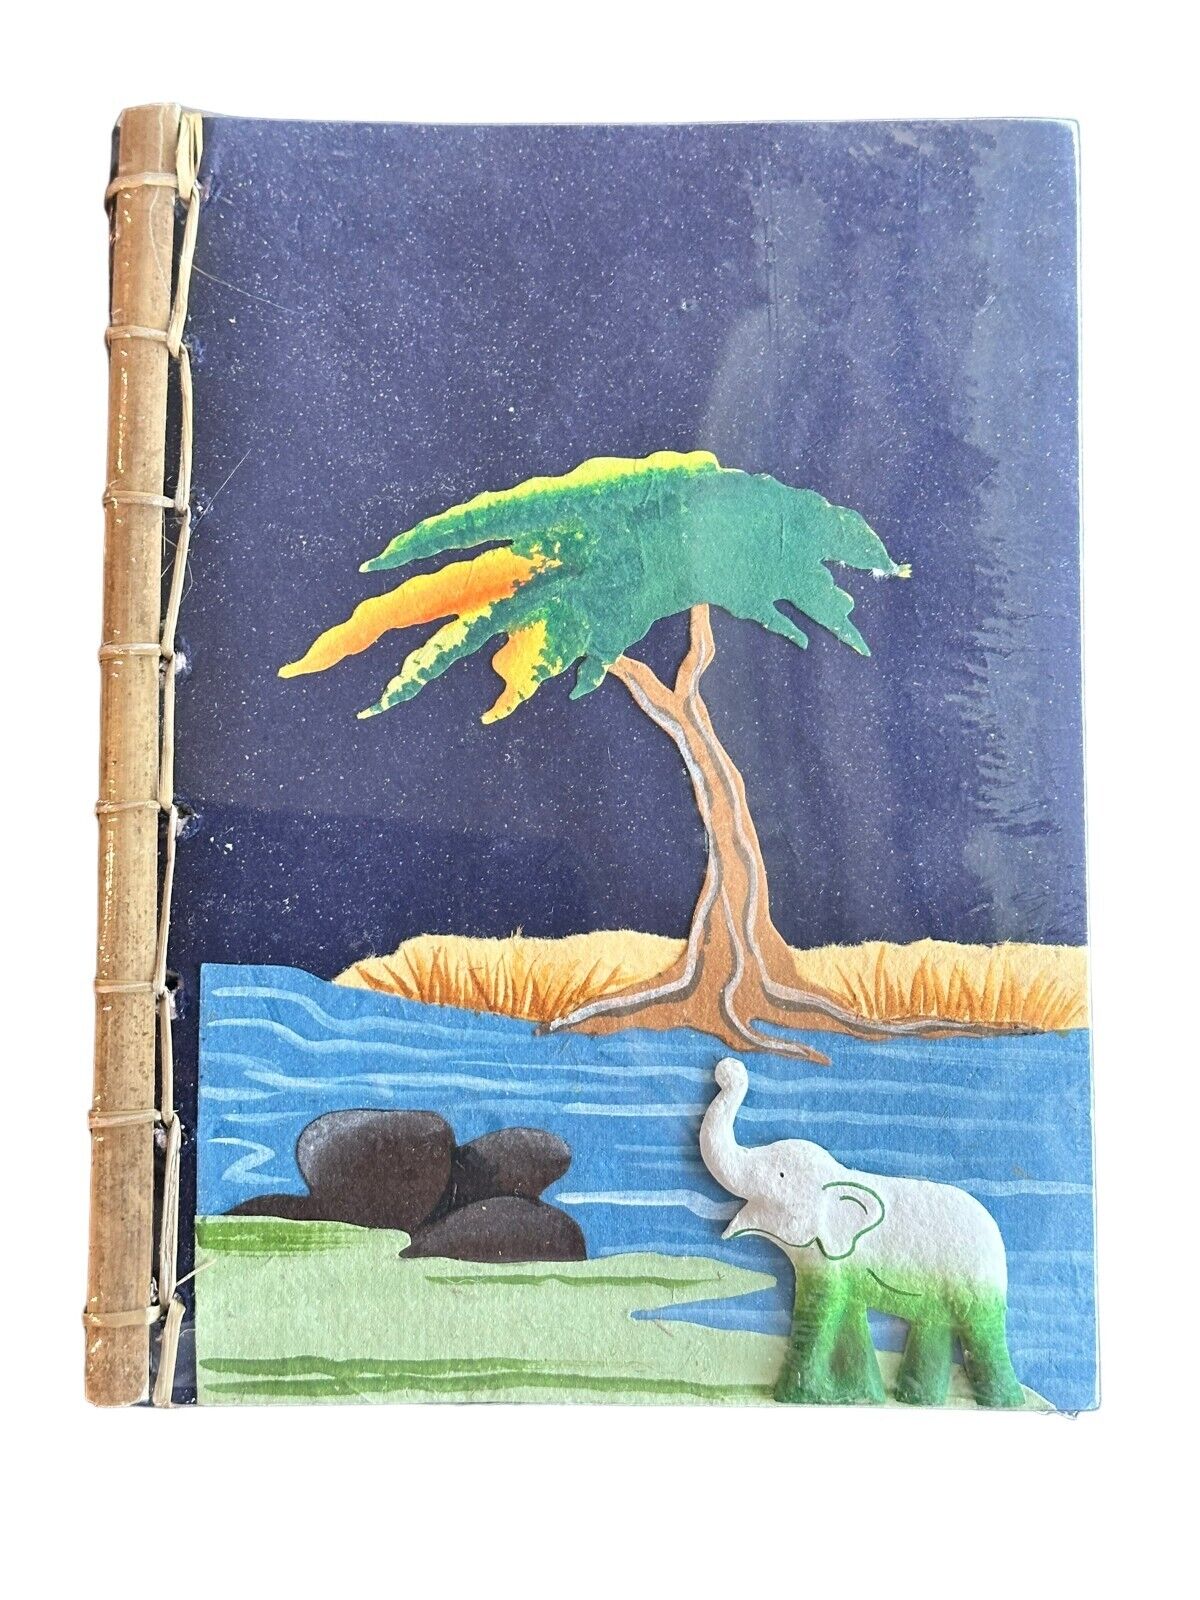 NEW Mr. Ellie Pooh's Elephant Dung Paper - Notebook - Eco Friendly - Sketch Book